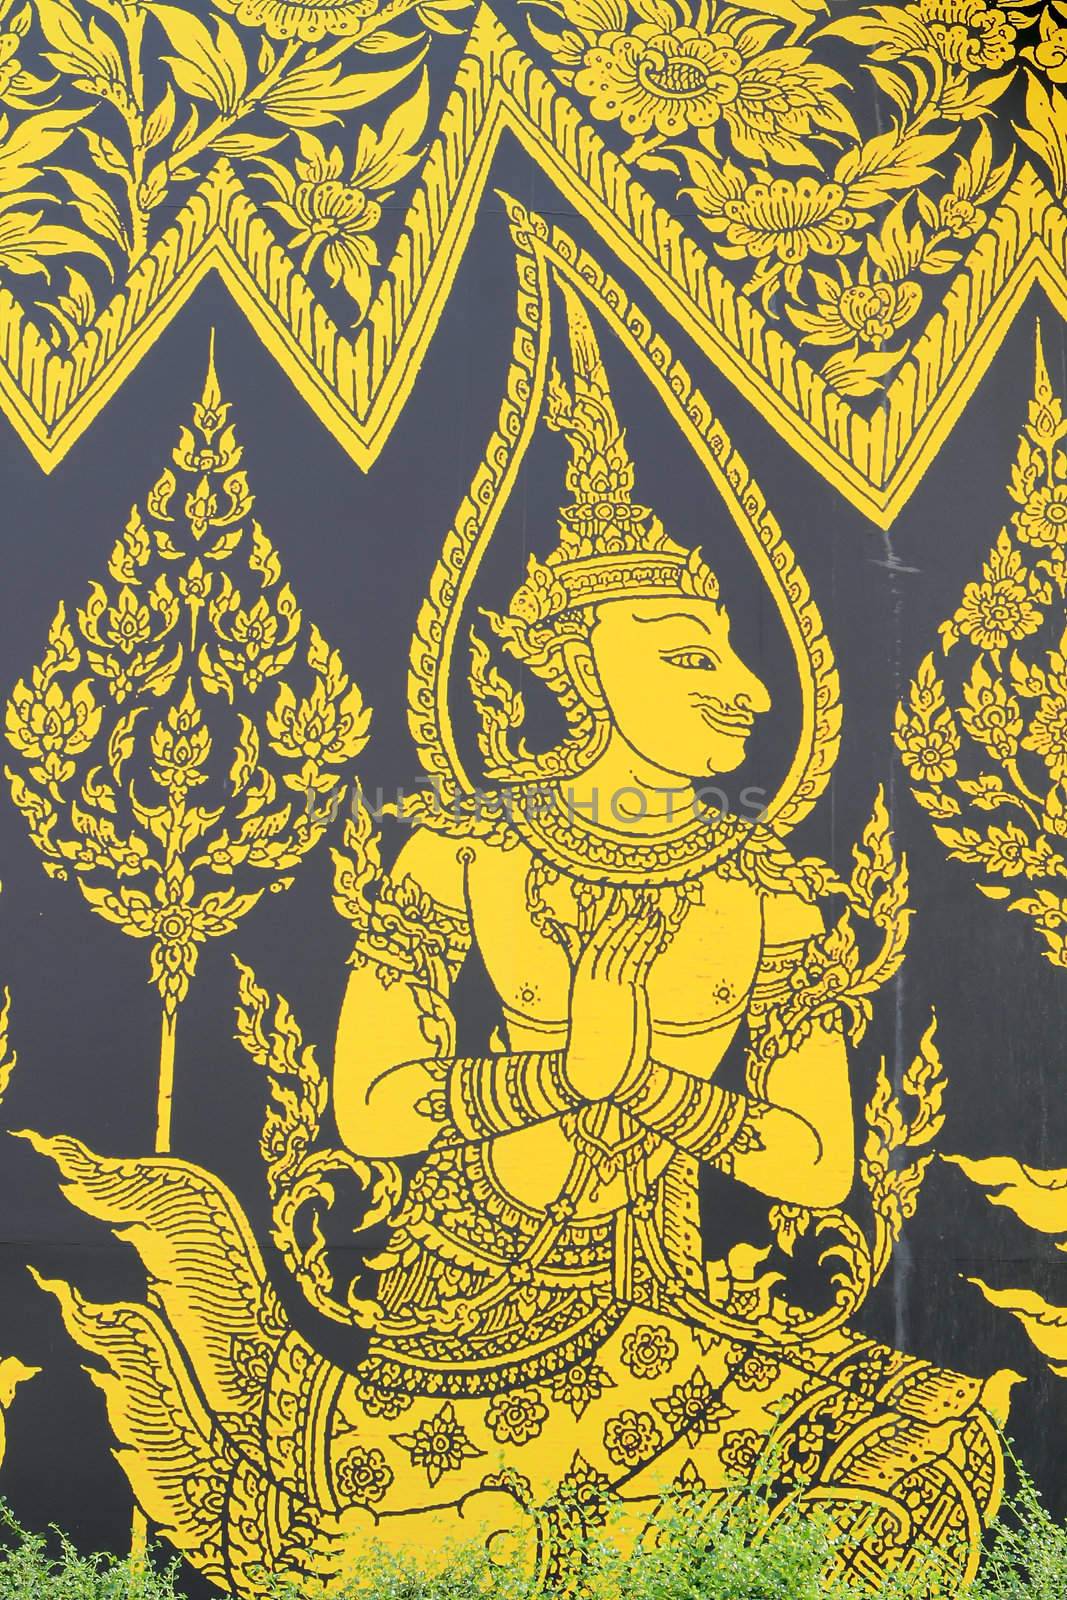 Buddhist Art on the Wall in Thai Temple 
 by rufous